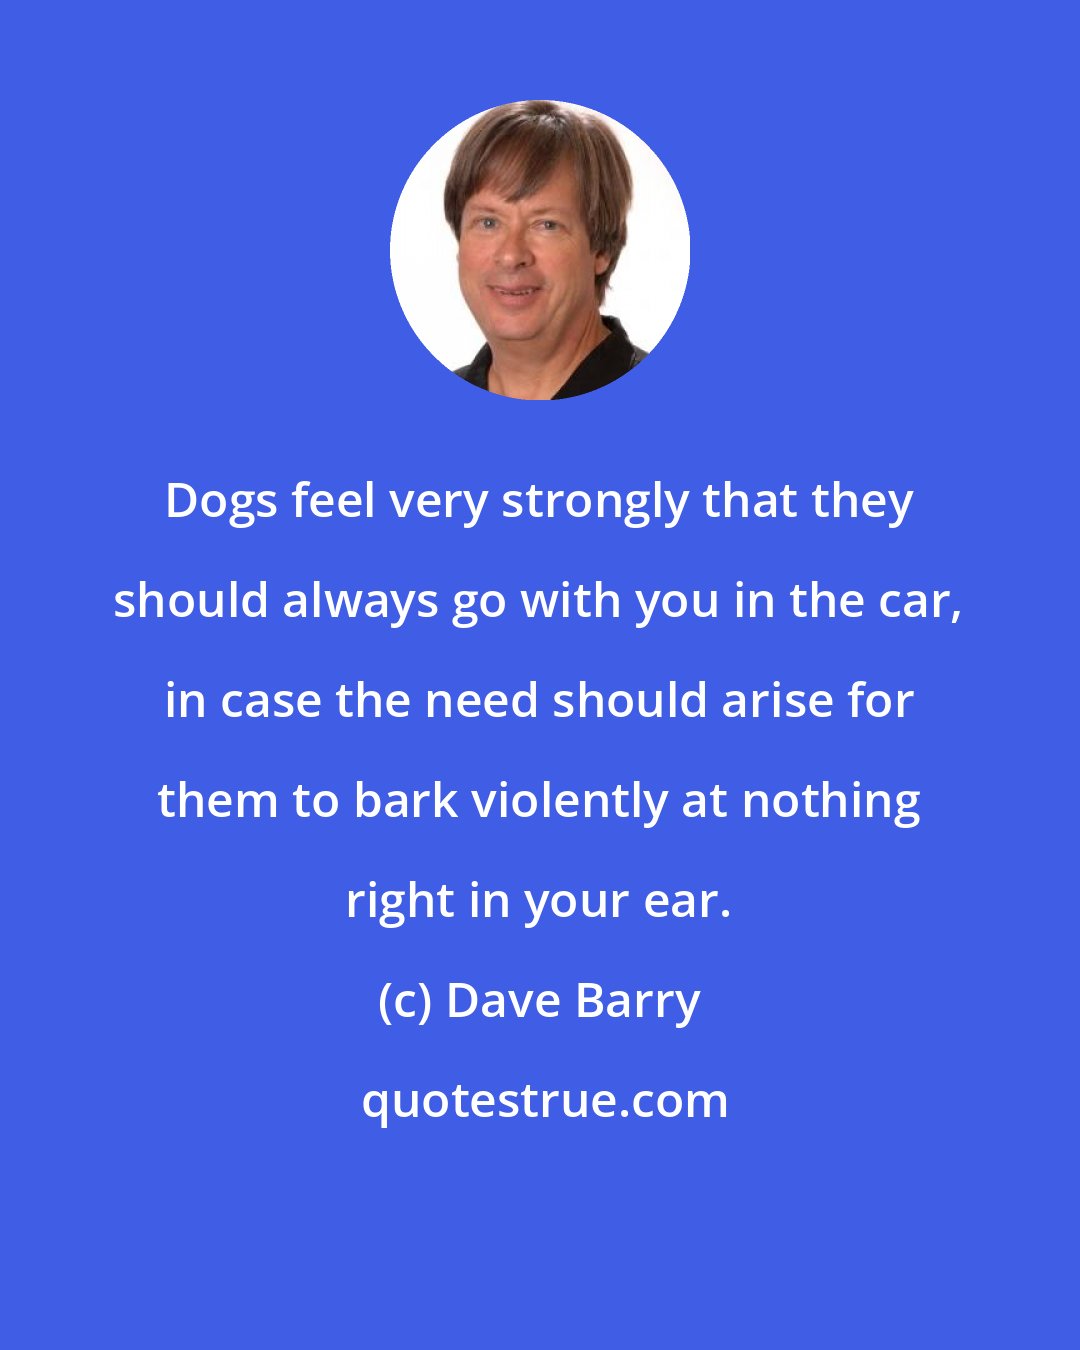 Dave Barry: Dogs feel very strongly that they should always go with you in the car, in case the need should arise for them to bark violently at nothing right in your ear.